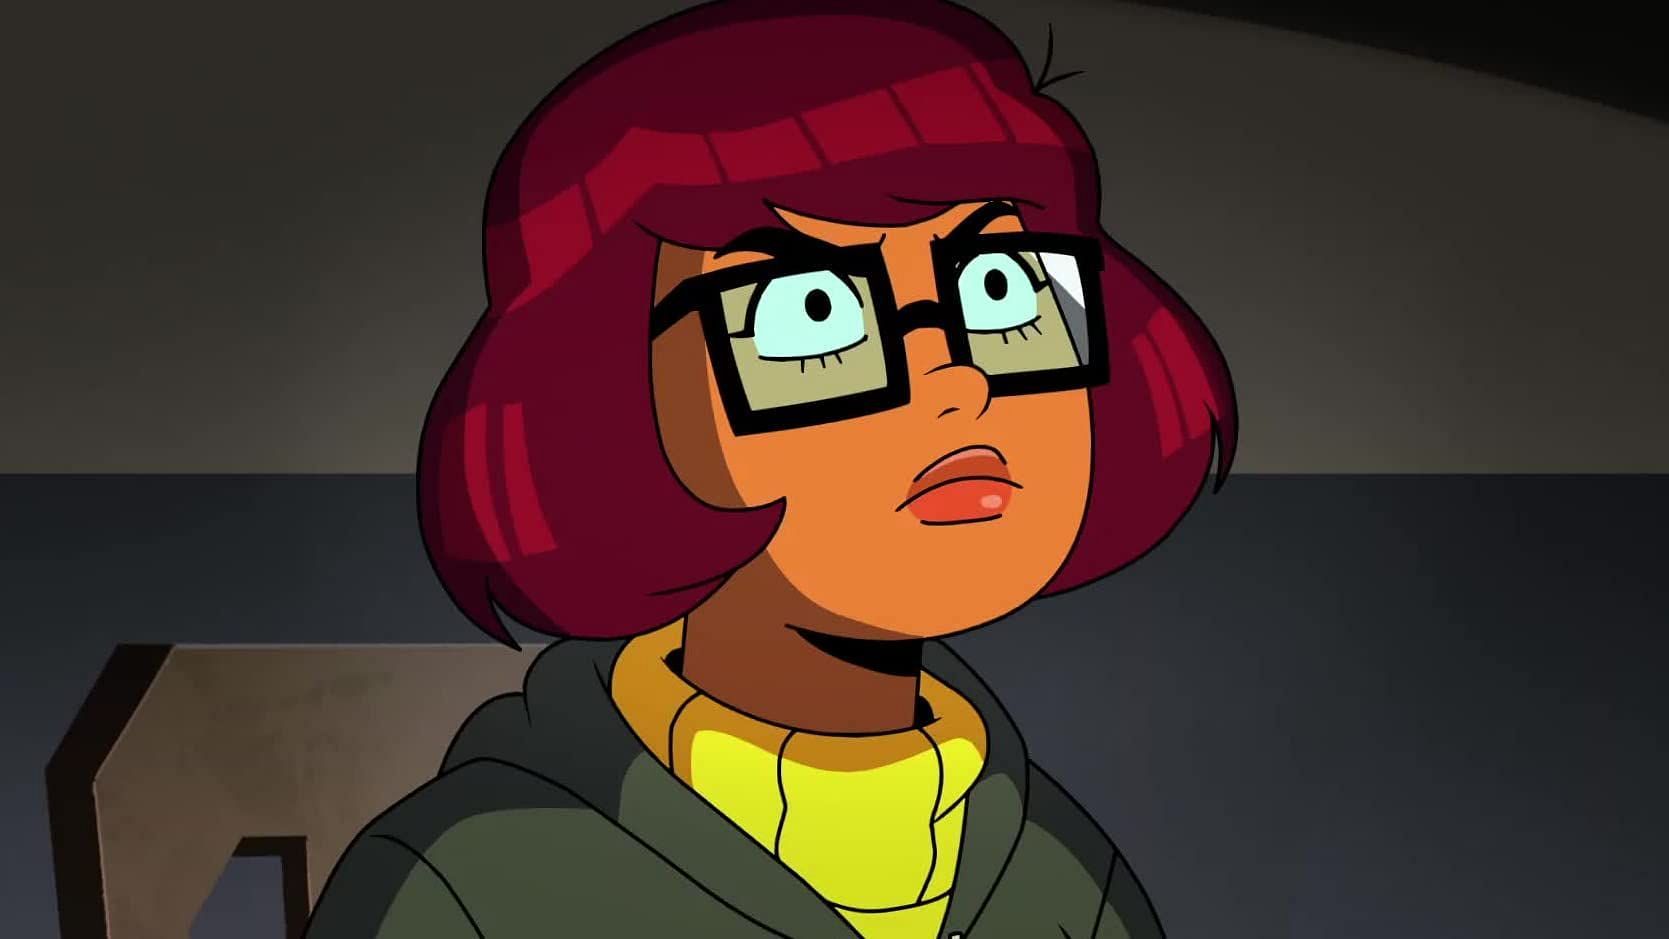 Velma': Mindy Kaling and Cast Talk Backlash, Scooby's Absence at NYCC